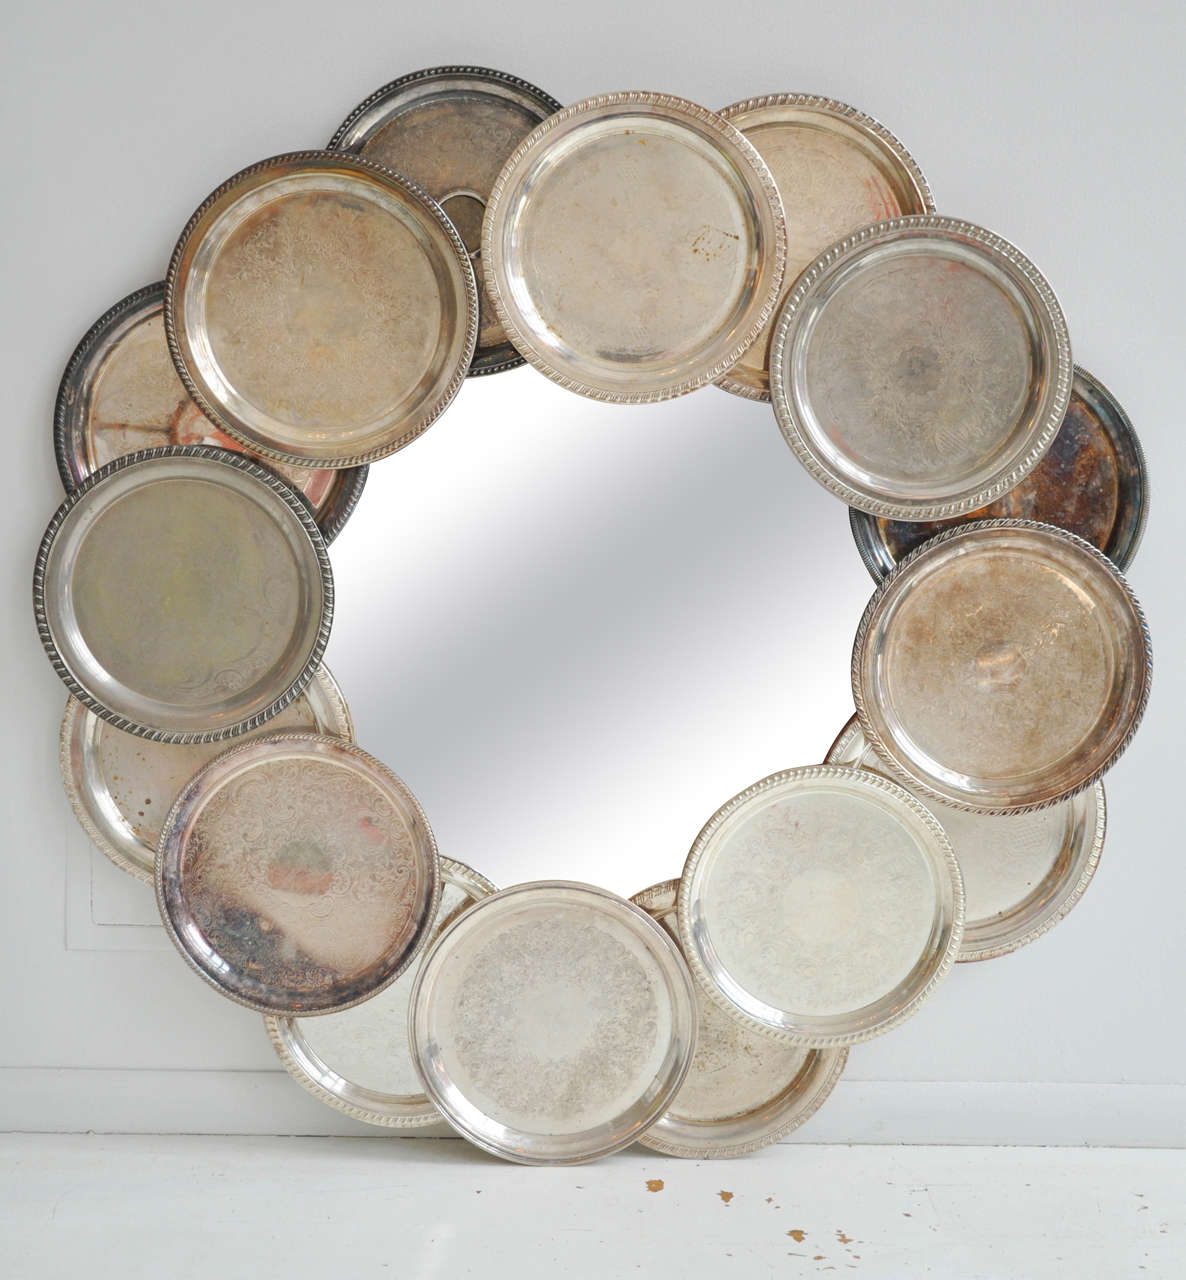 A unique statement piece! Mirror designed from a collection of antique silver plates.